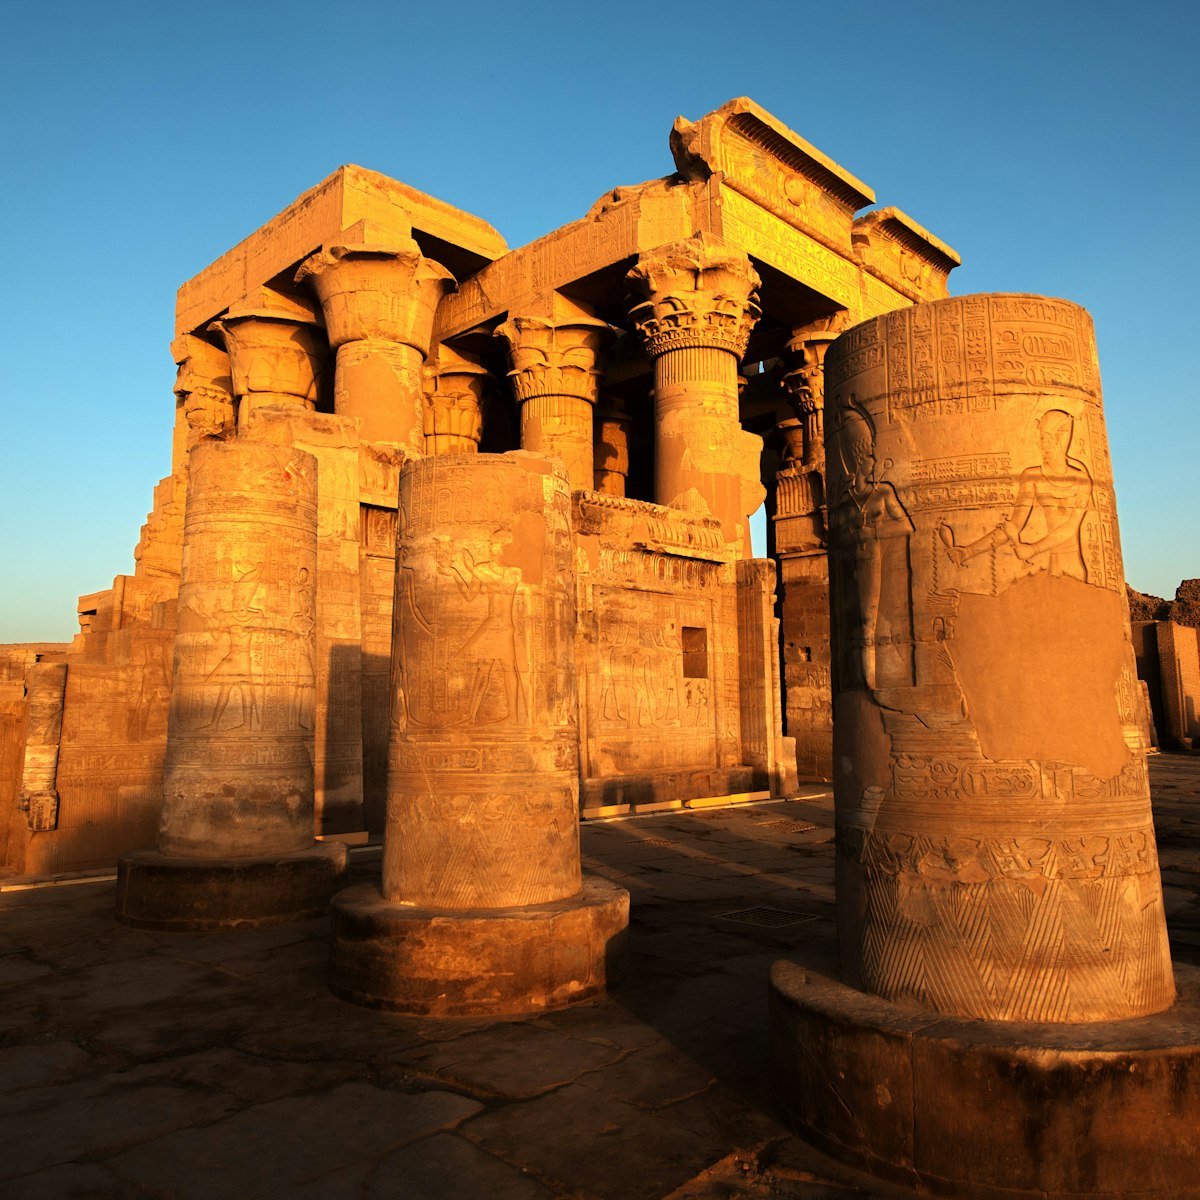 Temple Of Kom Ombo in Egypt.